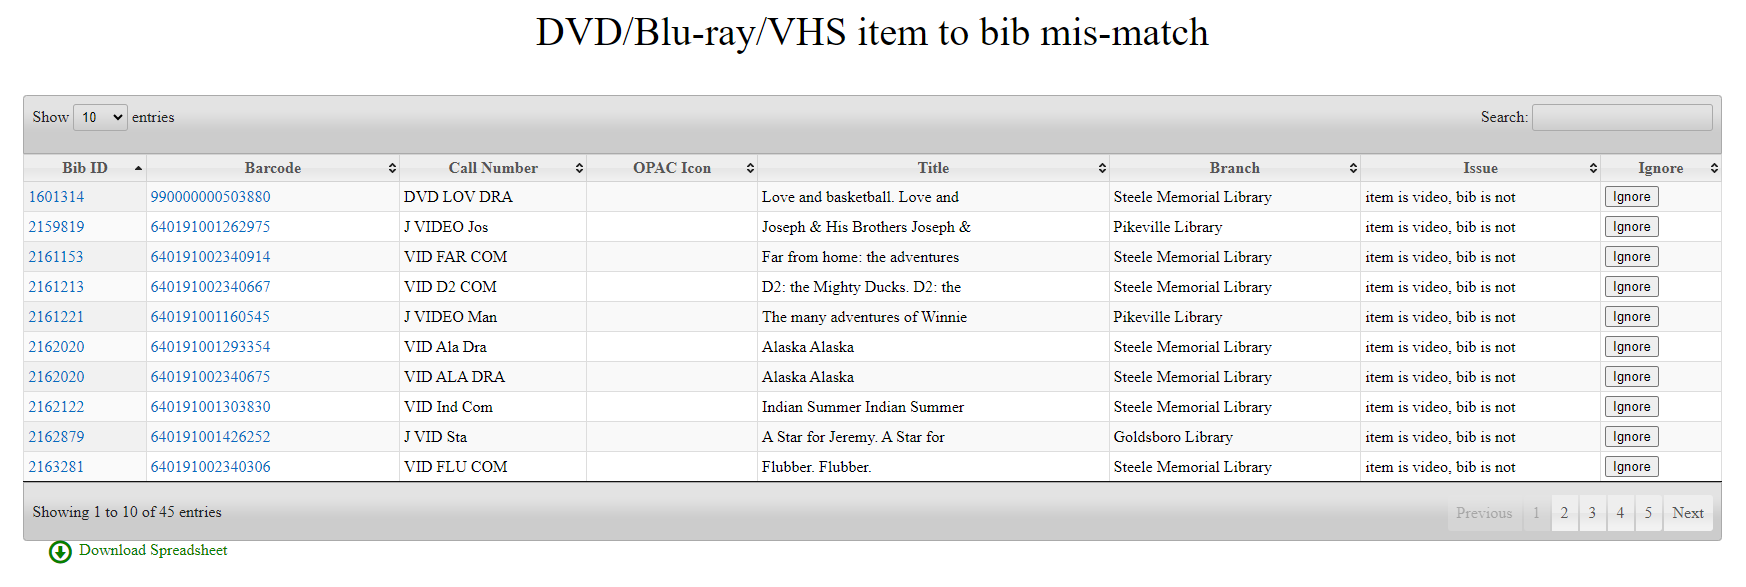 Example list of DVD/Blu-ray/VHS item to bib mis-matches